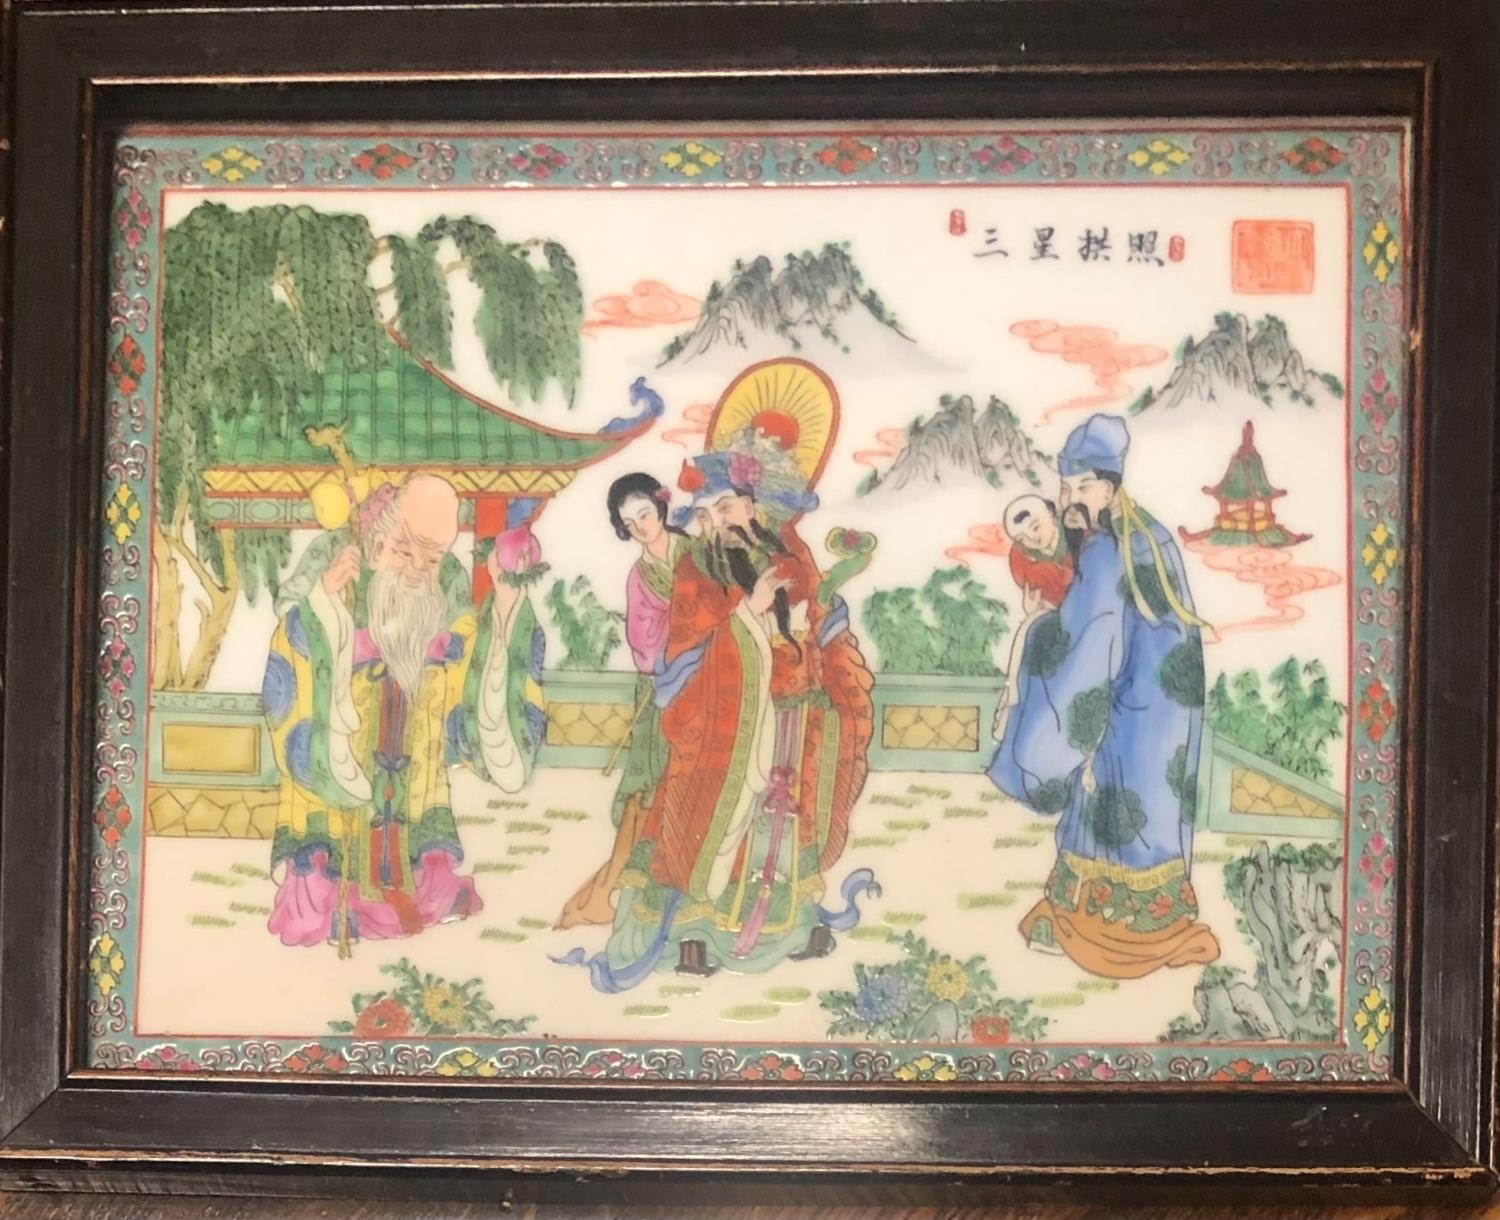 A CHINESE PORCELAIN PLAQUE Decorated with figures in a garden setting and script, framed. (33cm x - Image 3 of 4